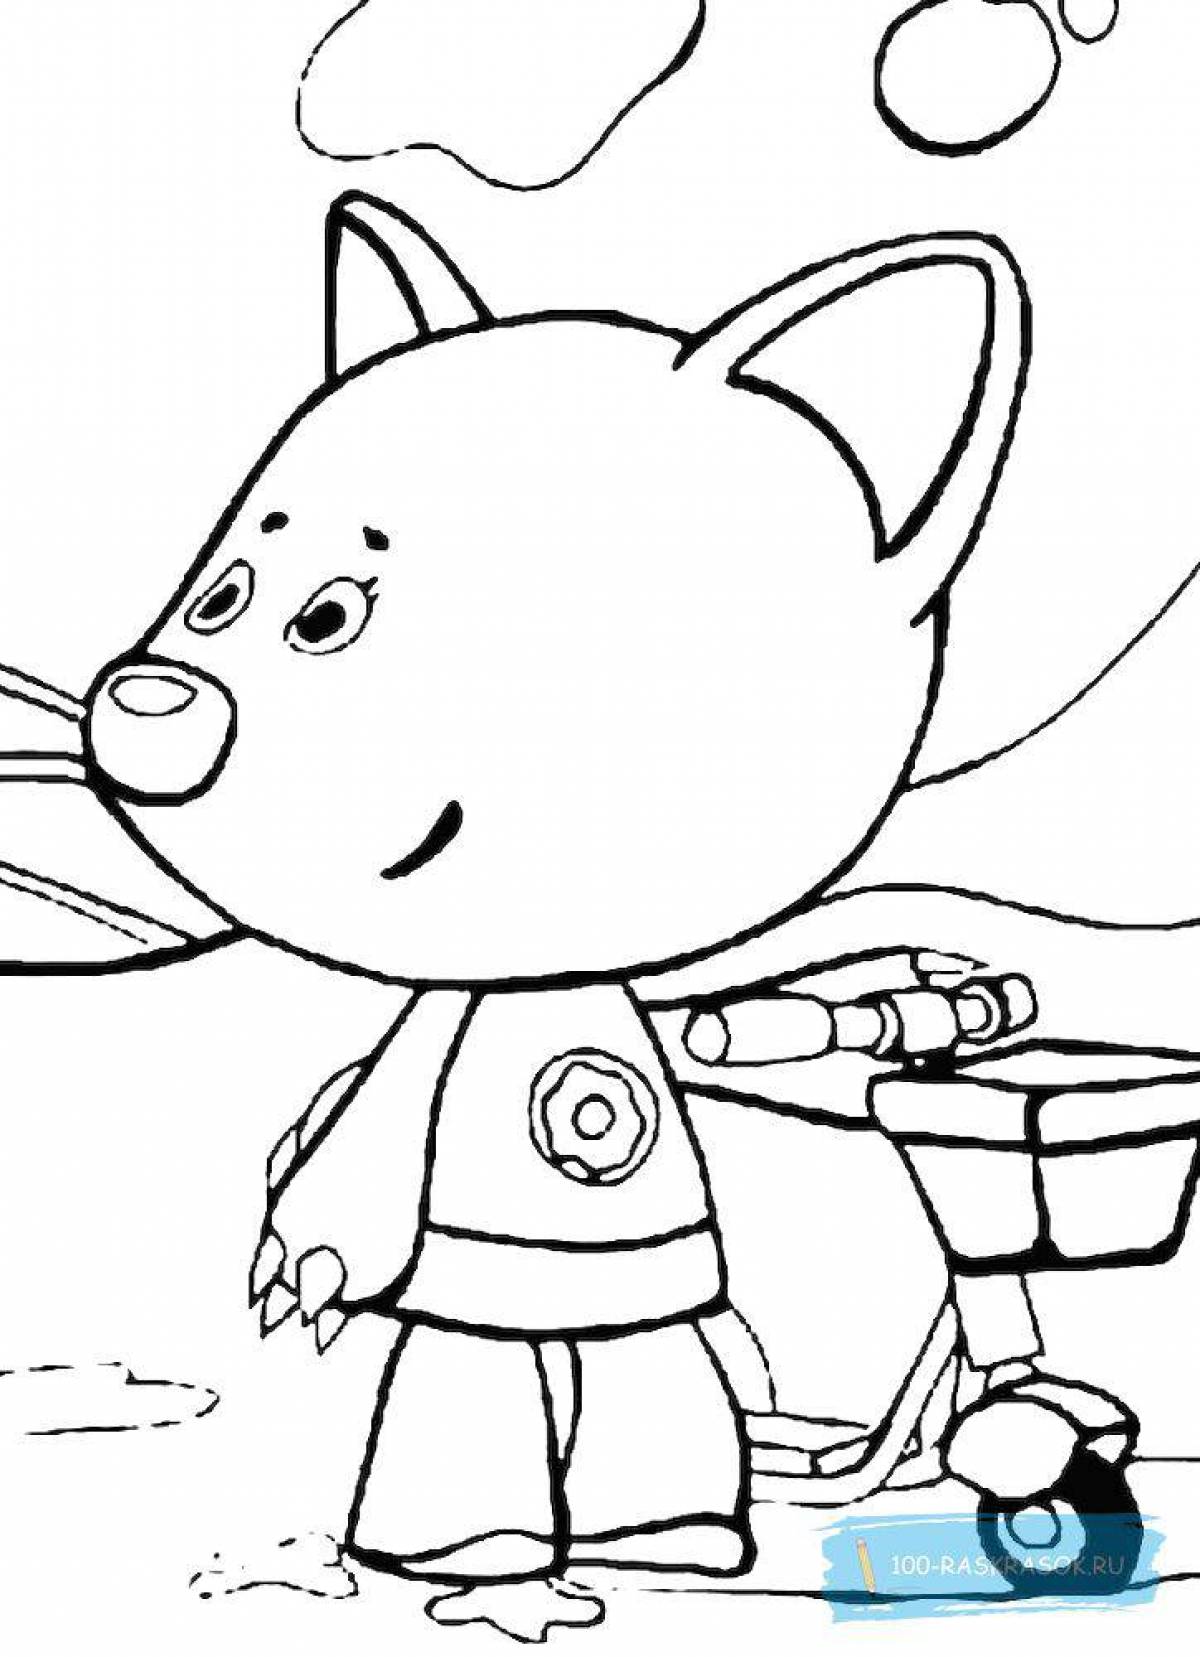 Adorable bear coloring pages